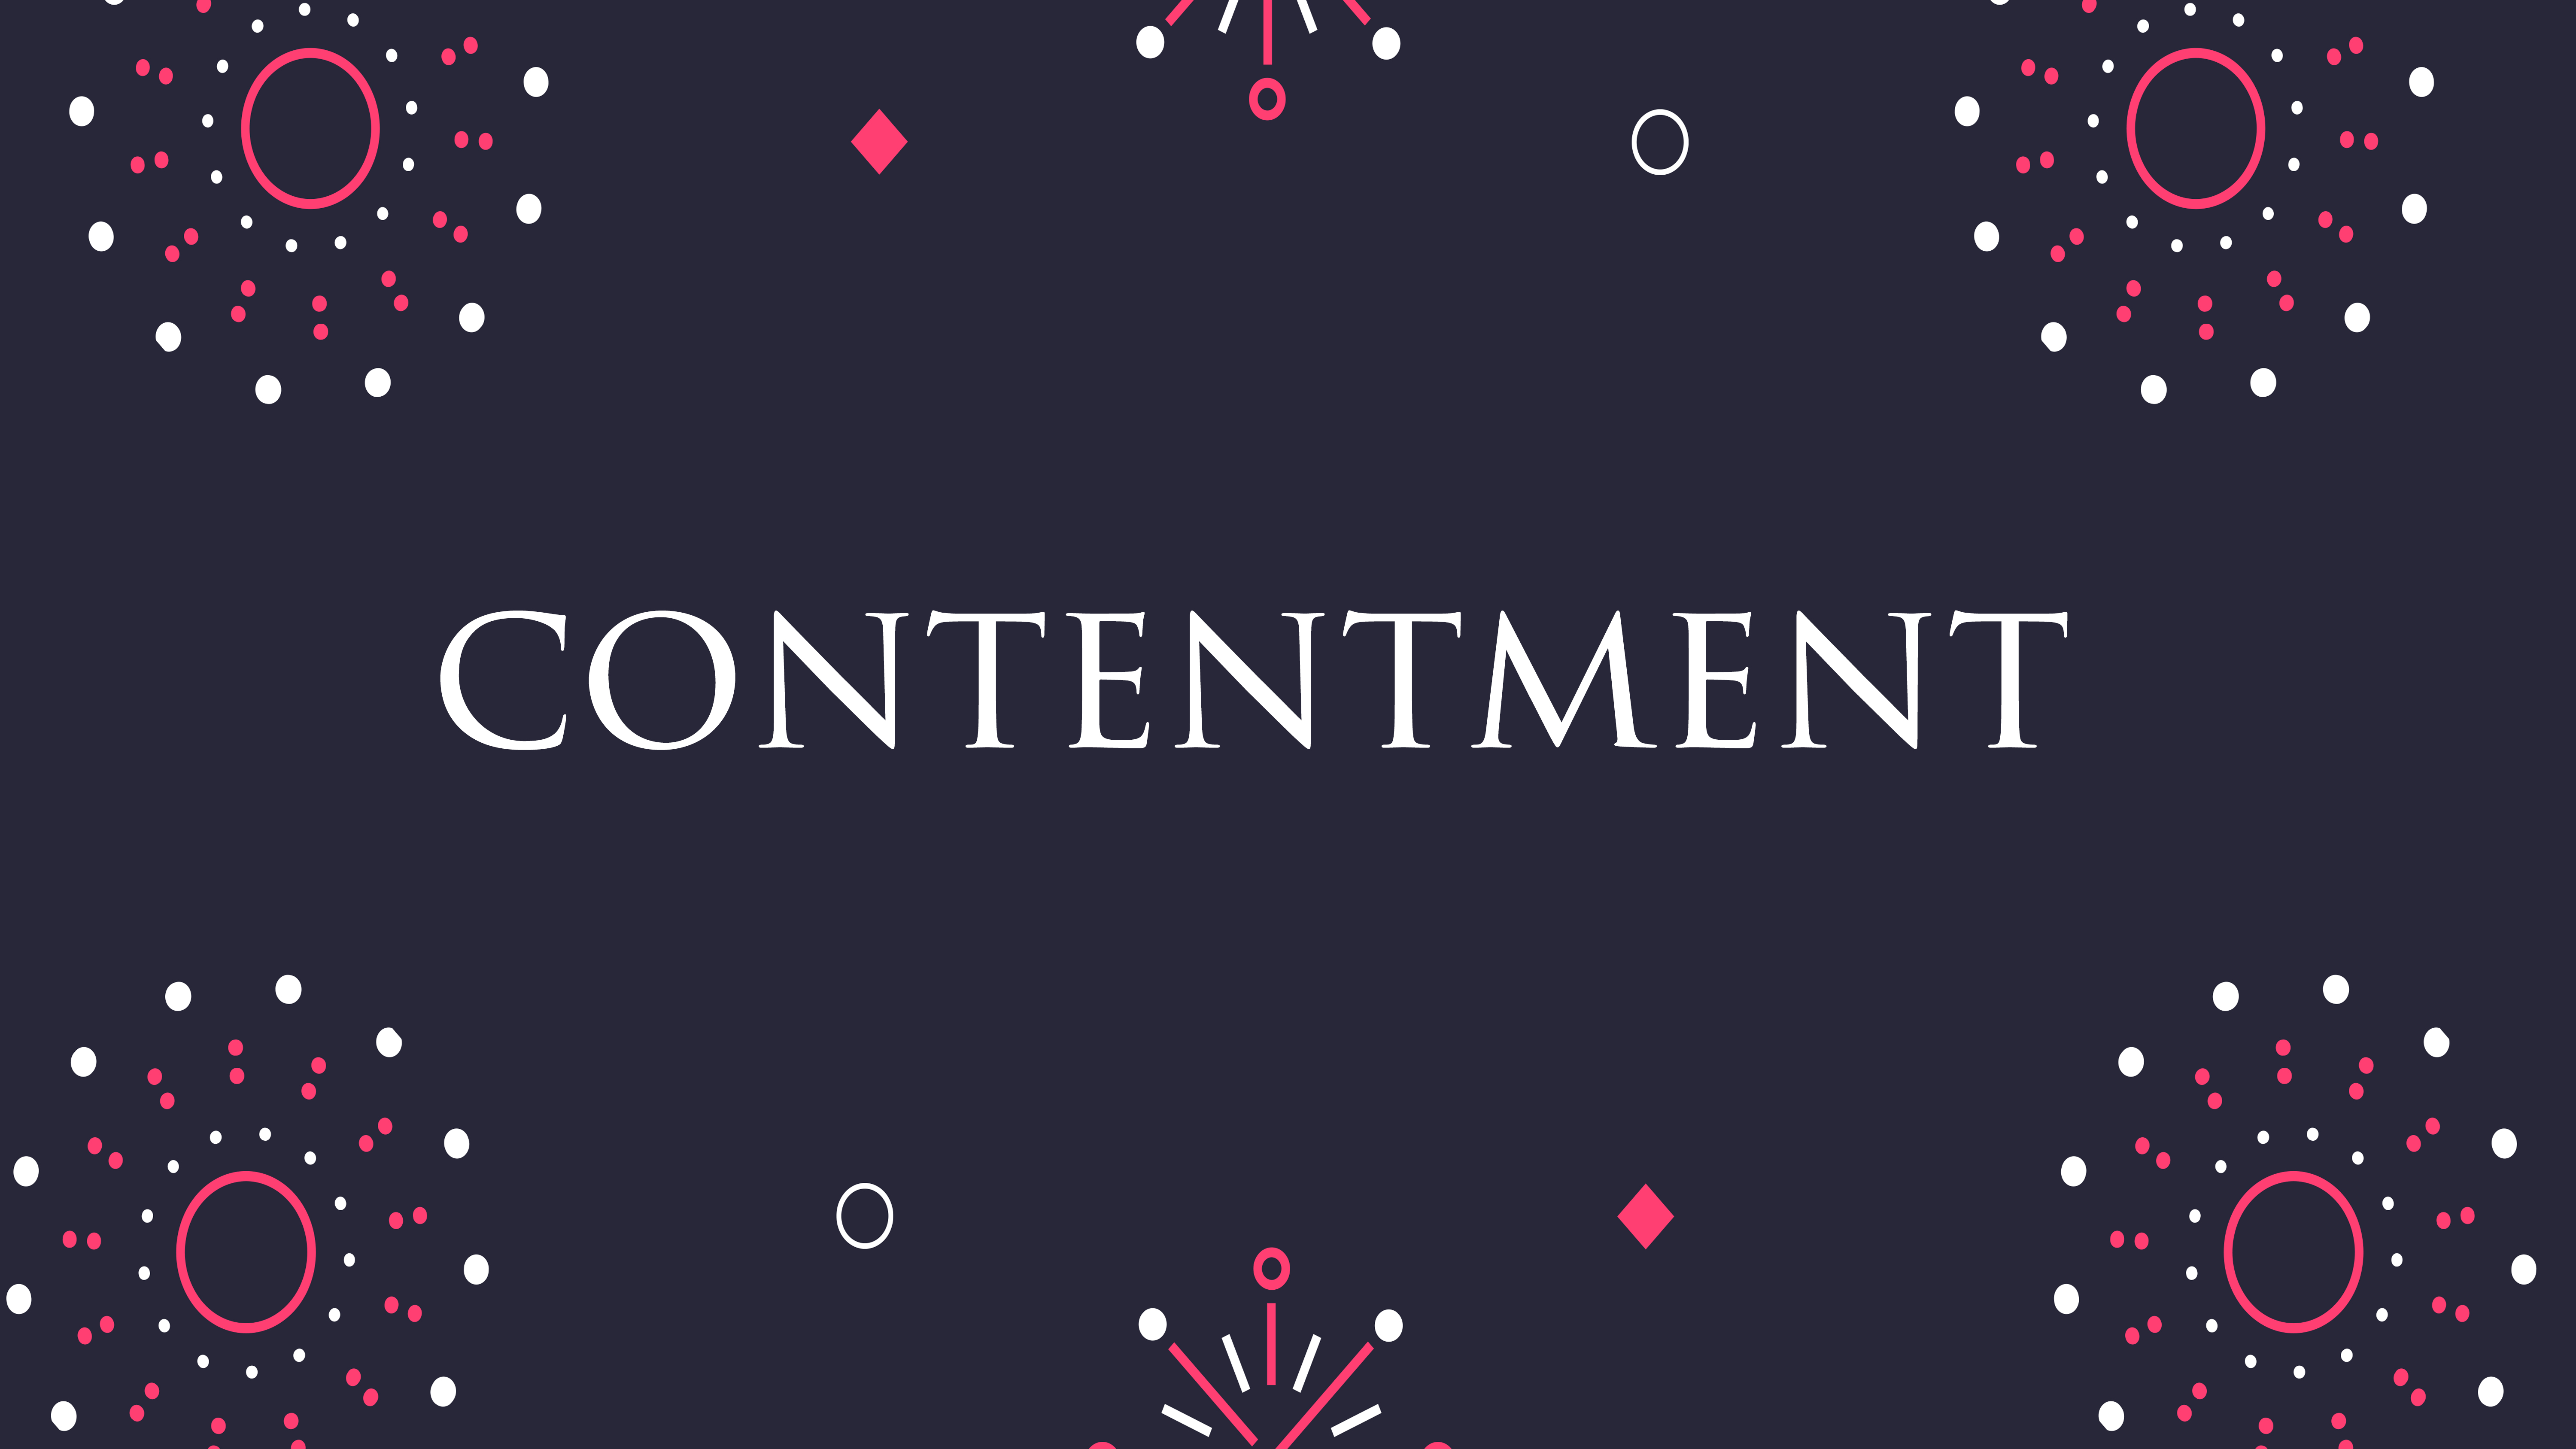 The Key to Contentment Image